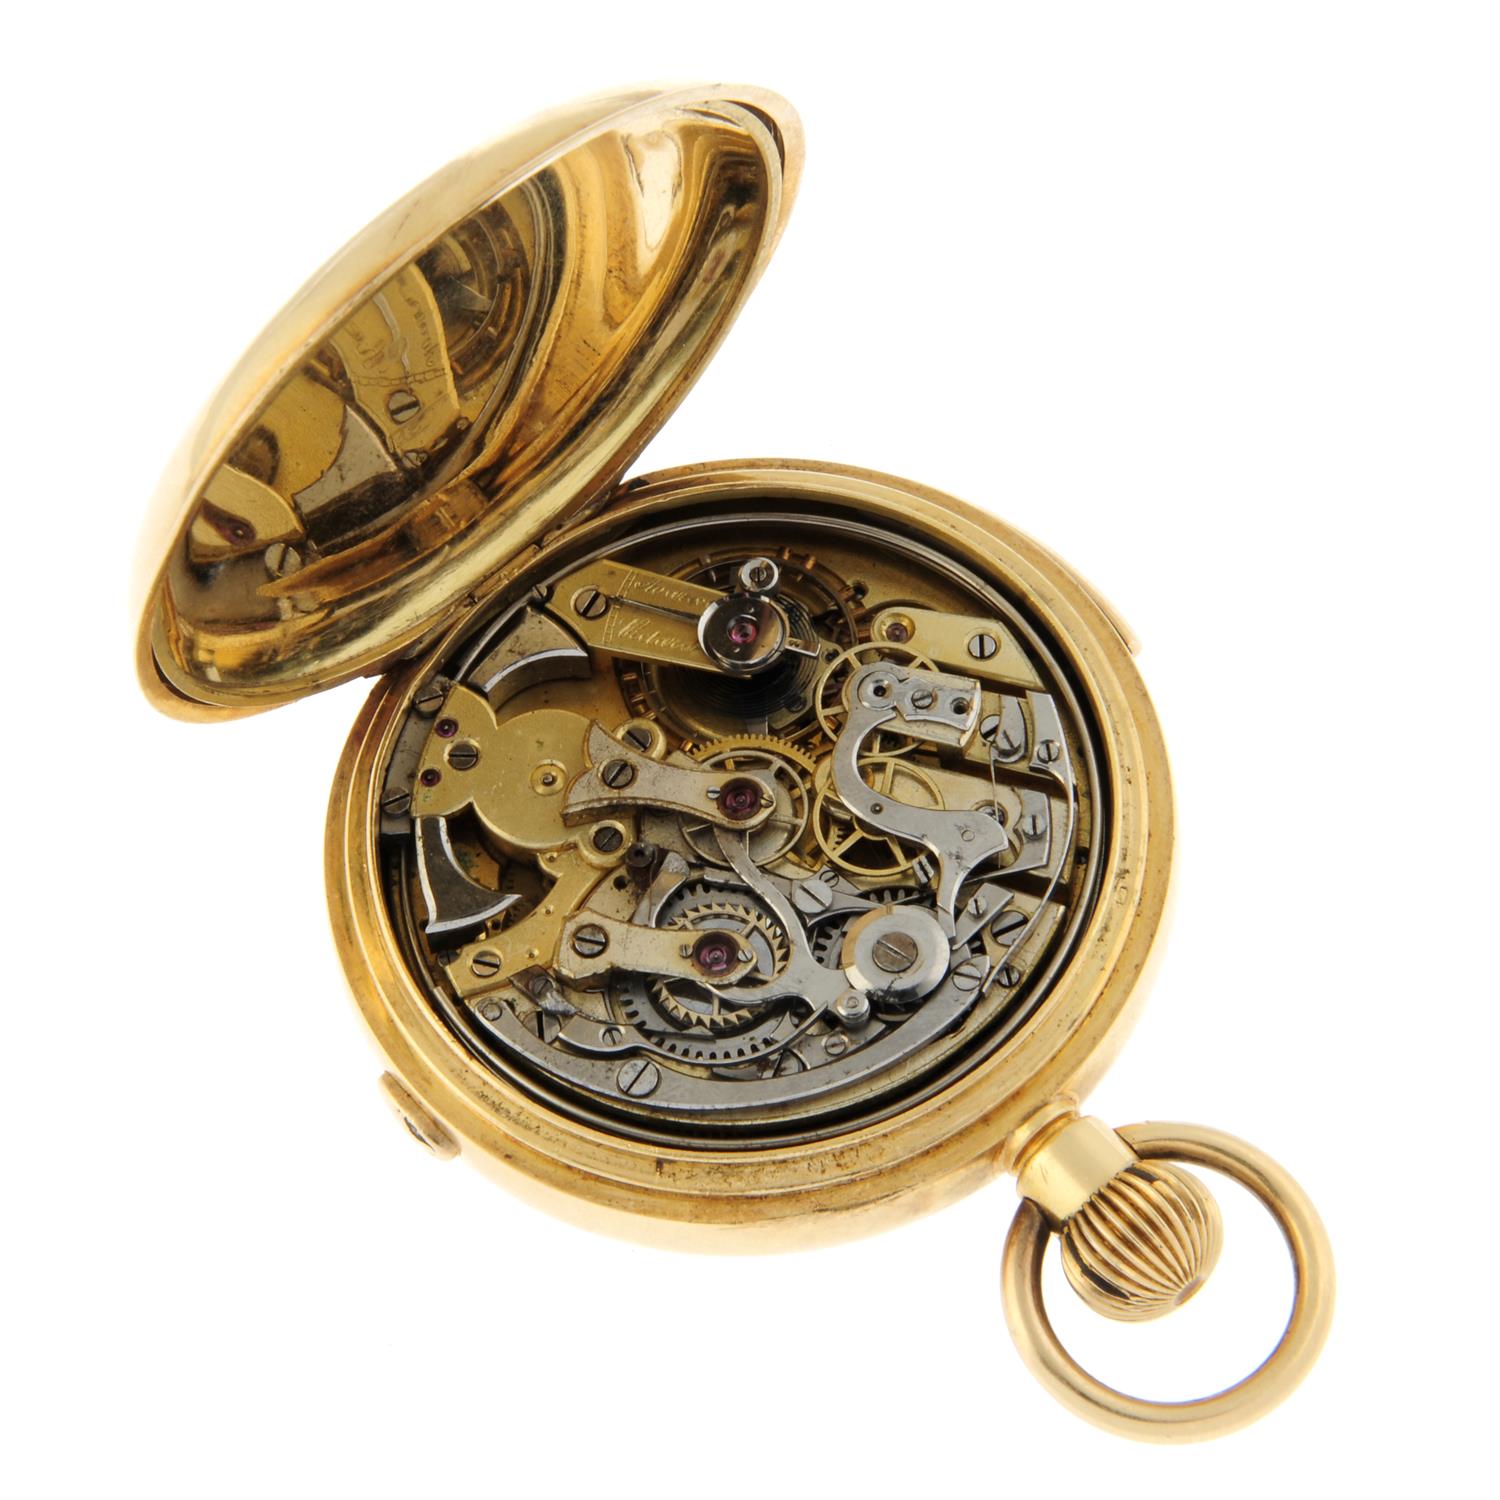 A full hunter repeater chronograph pocket watch, 52mm. - Image 3 of 3